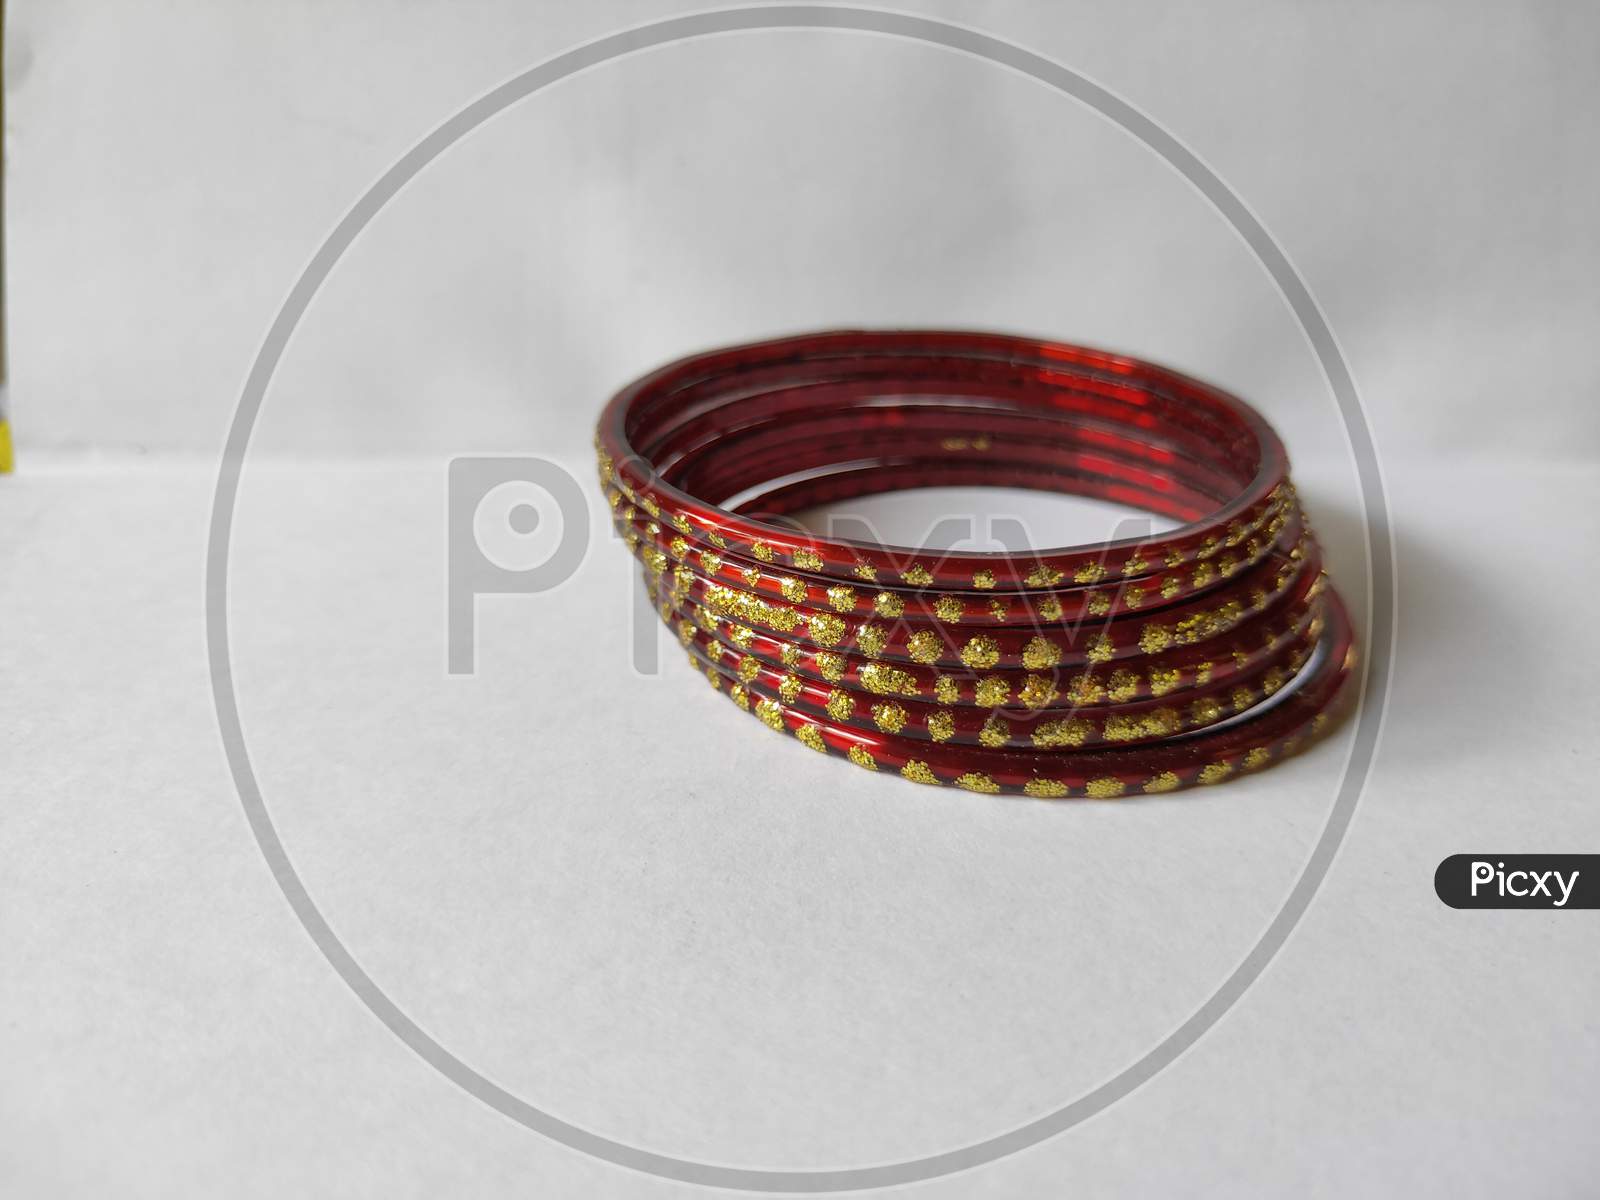 Bangles on white background. Red bangles on plain background. Glass jewelry bangles close up view.